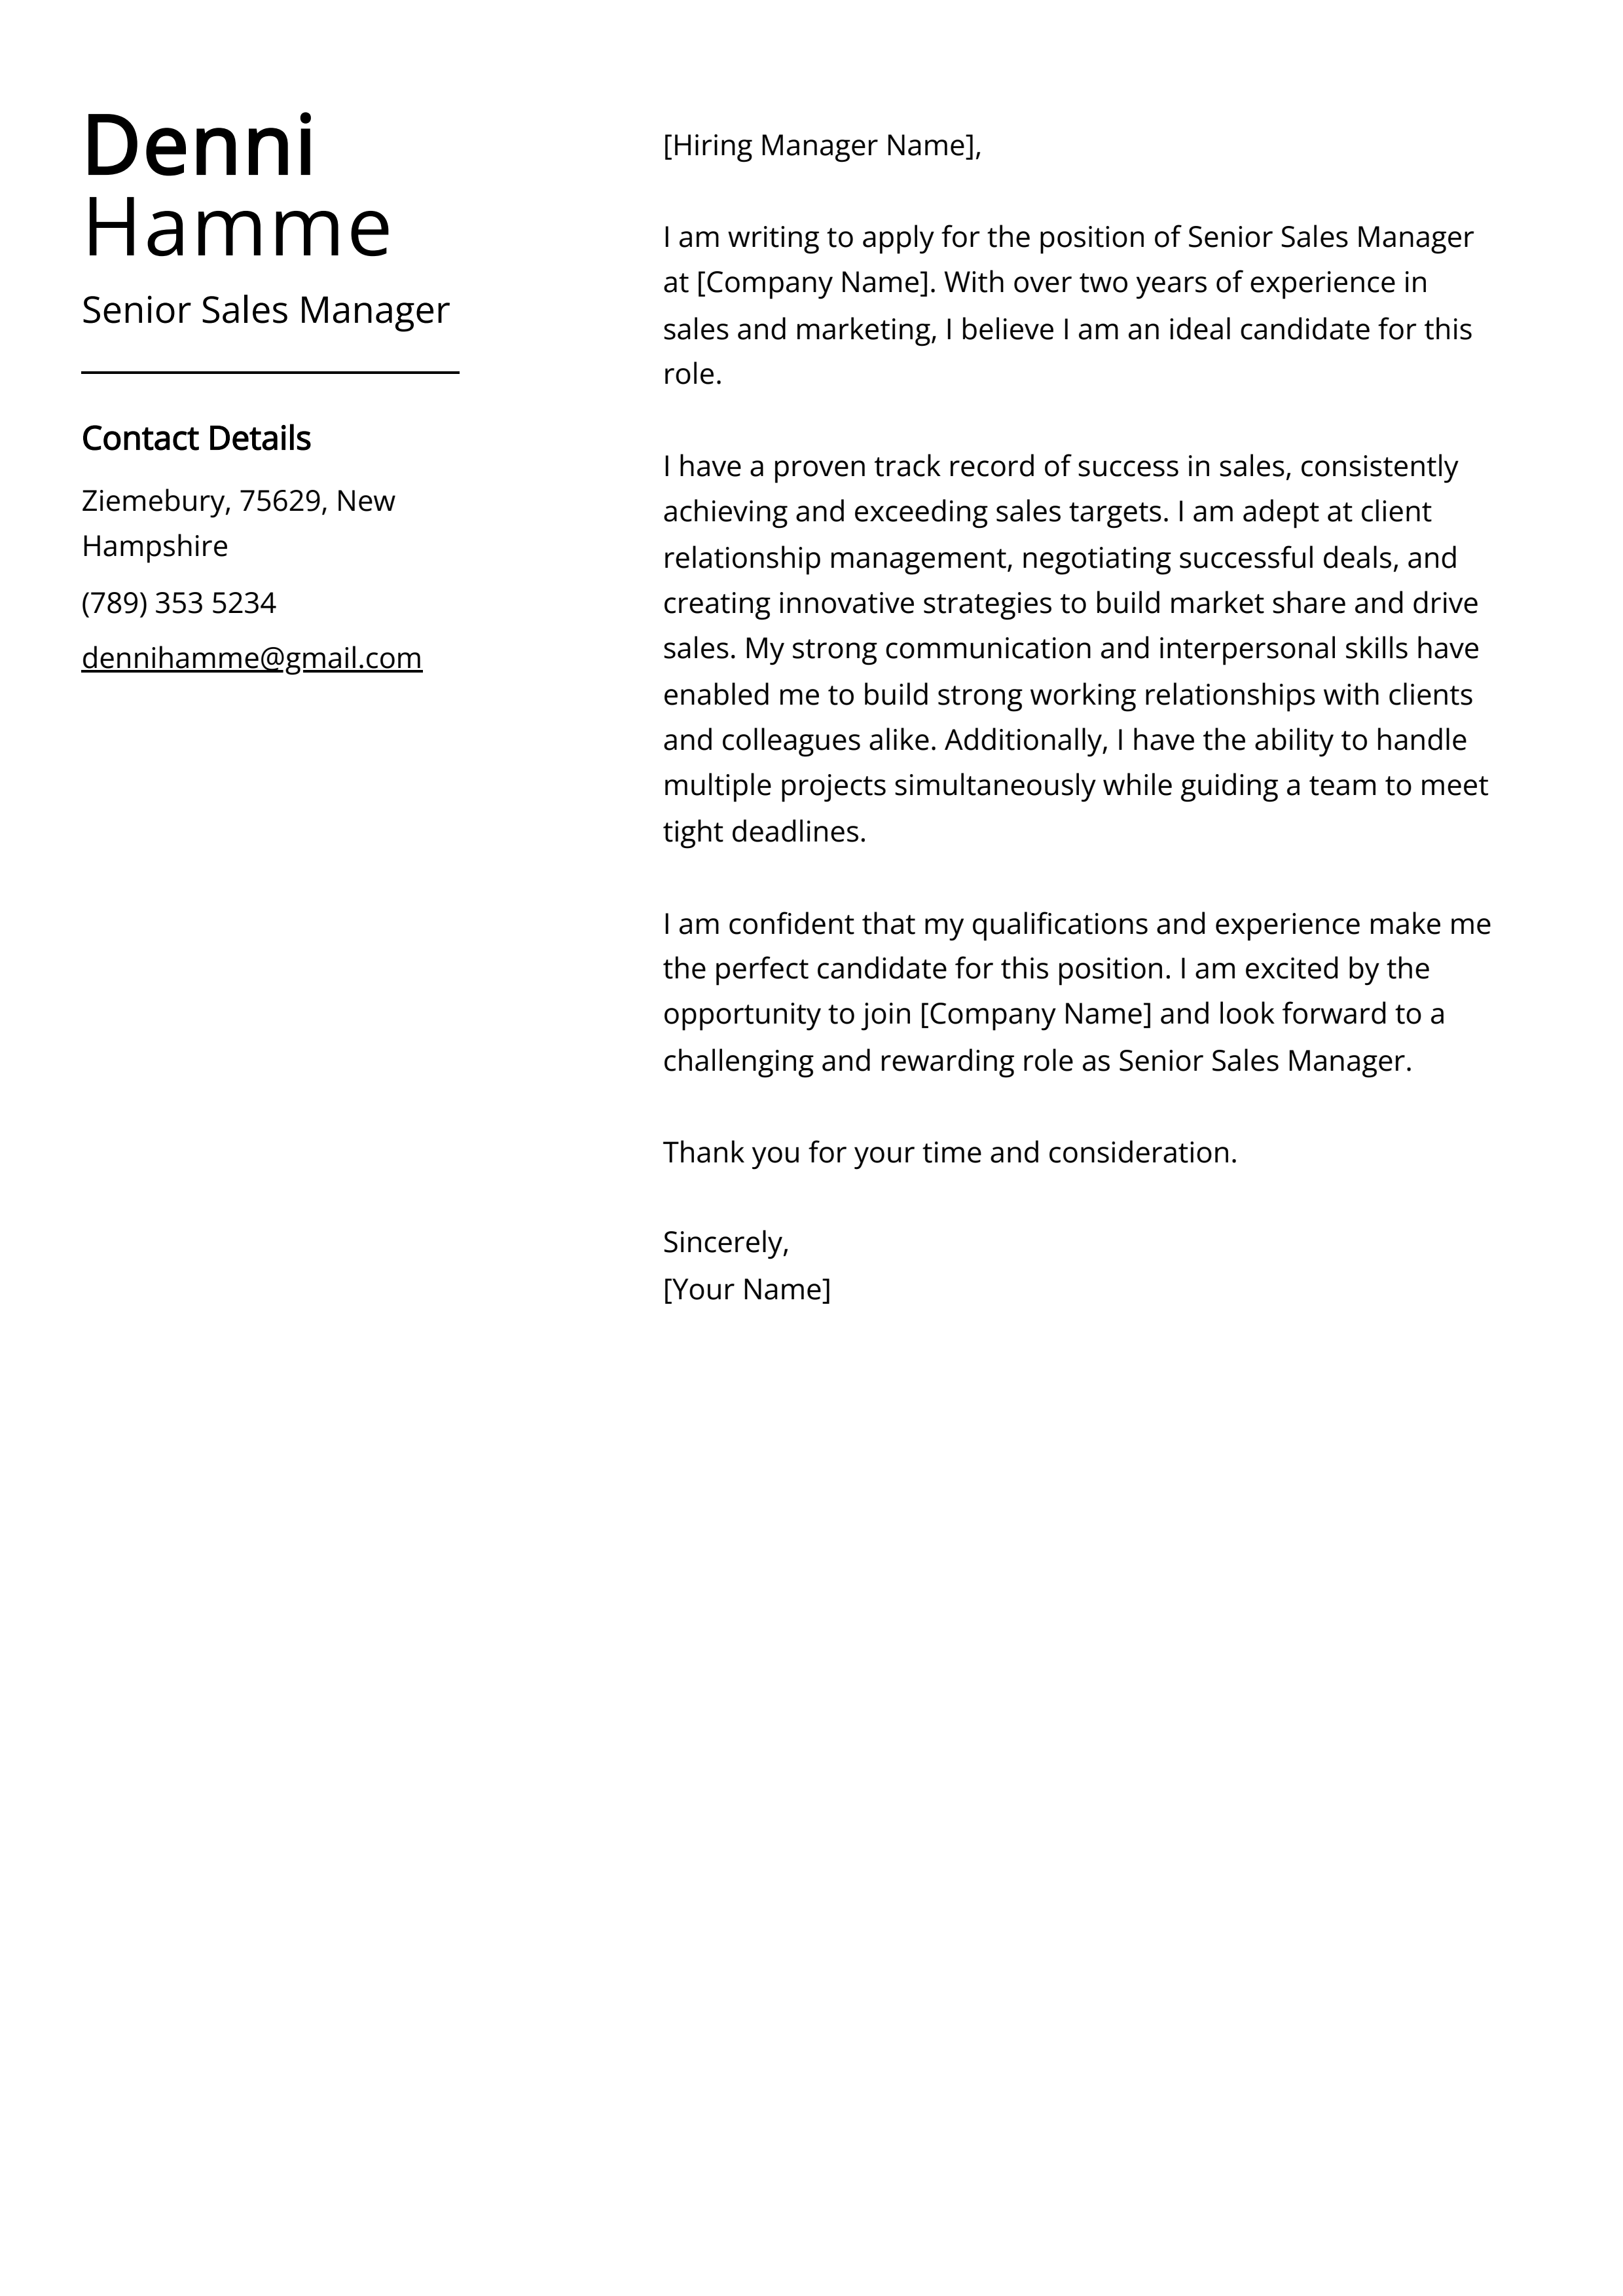 Senior Sales Manager Cover Letter Example